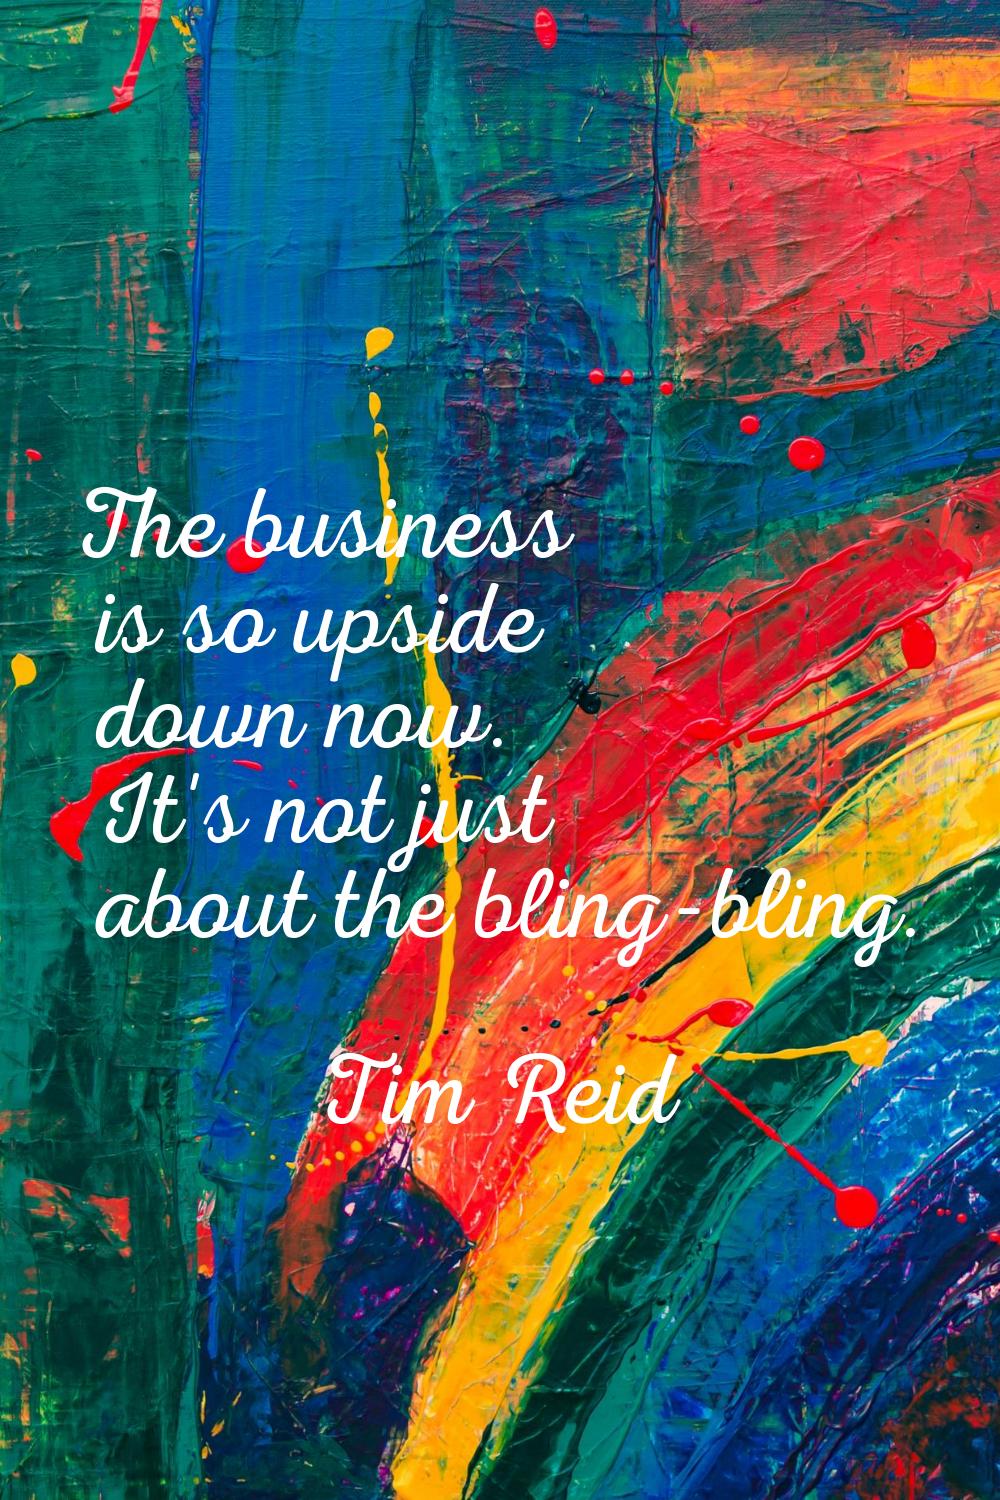 The business is so upside down now. It's not just about the bling-bling.